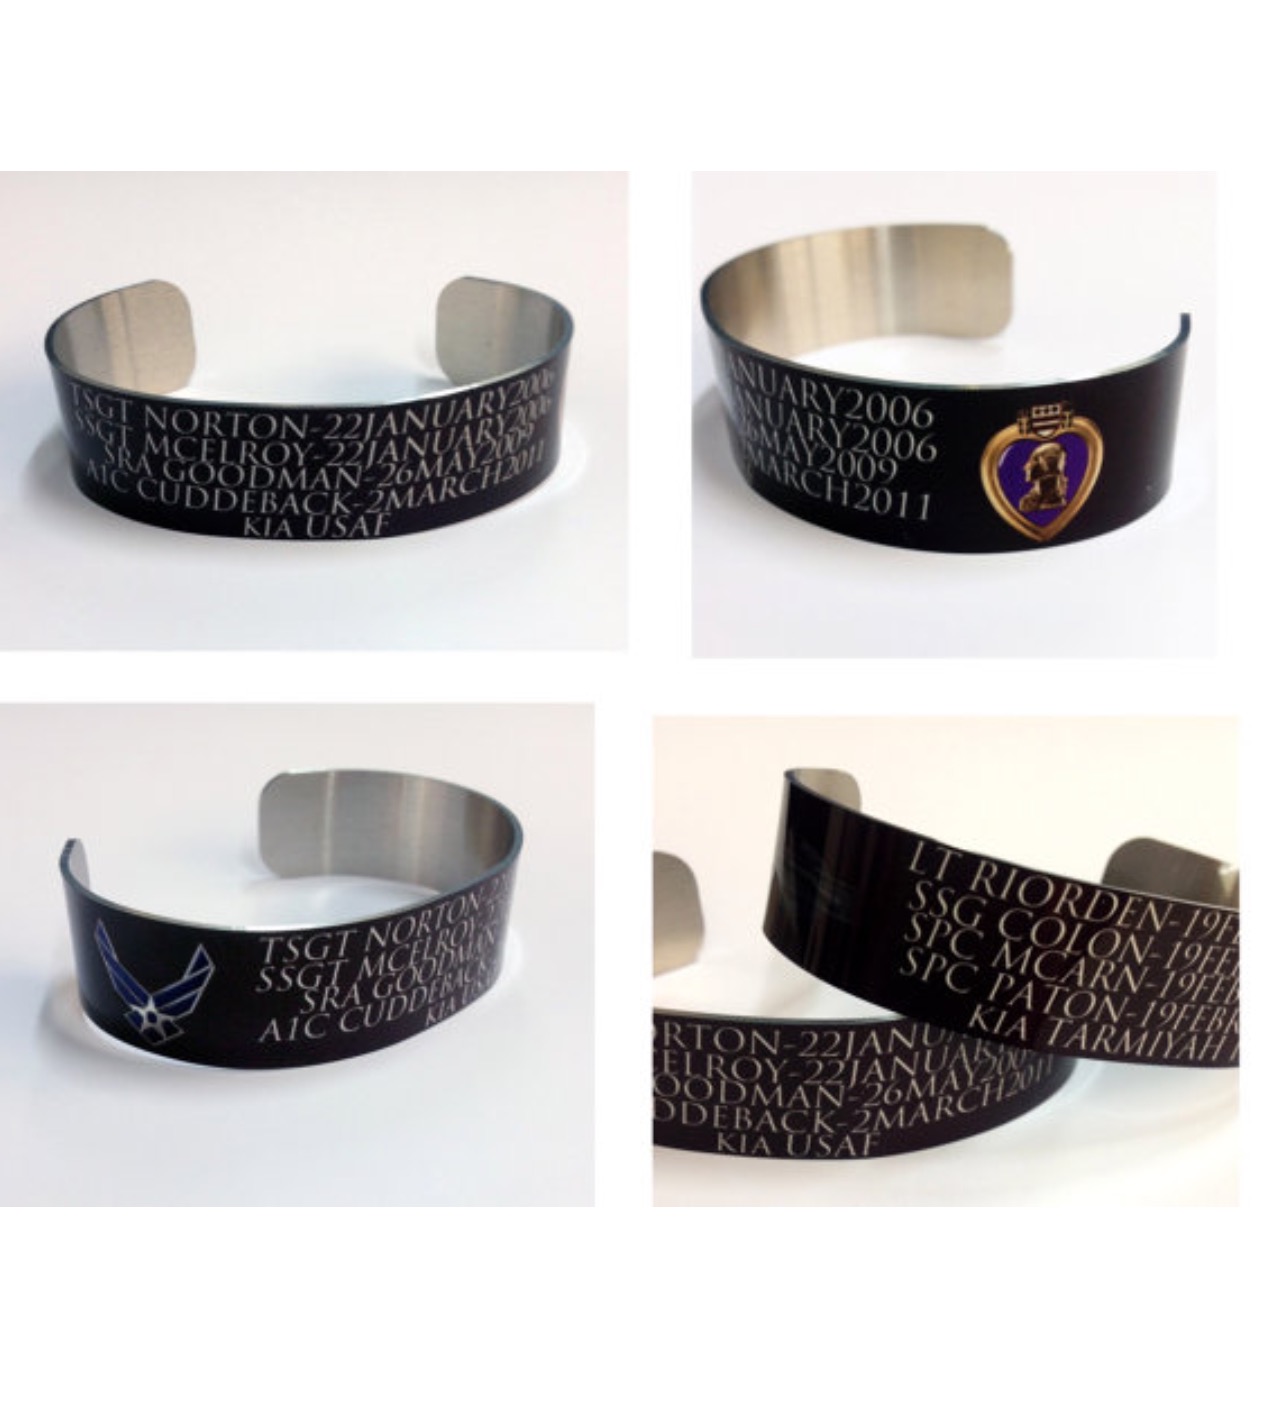 Memorial Cuff Bracelet made with sublimation printing